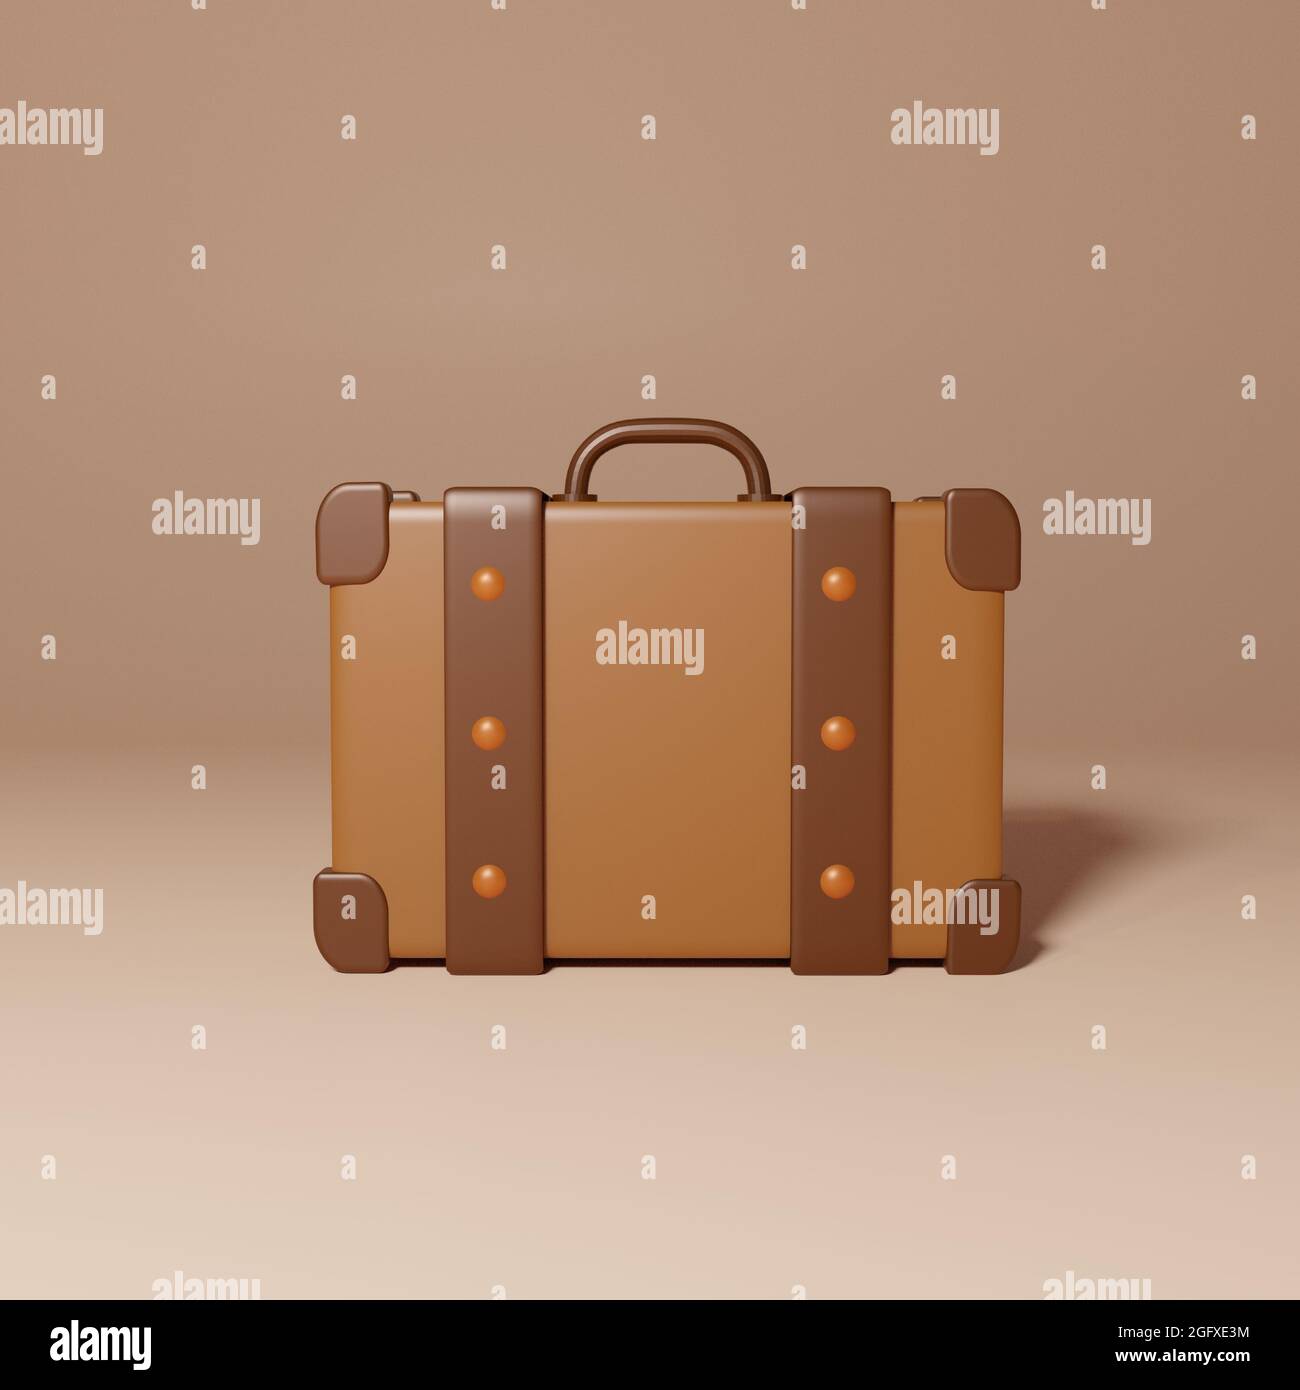 small suitcase 3d design illustration with cycle render Stock Photo